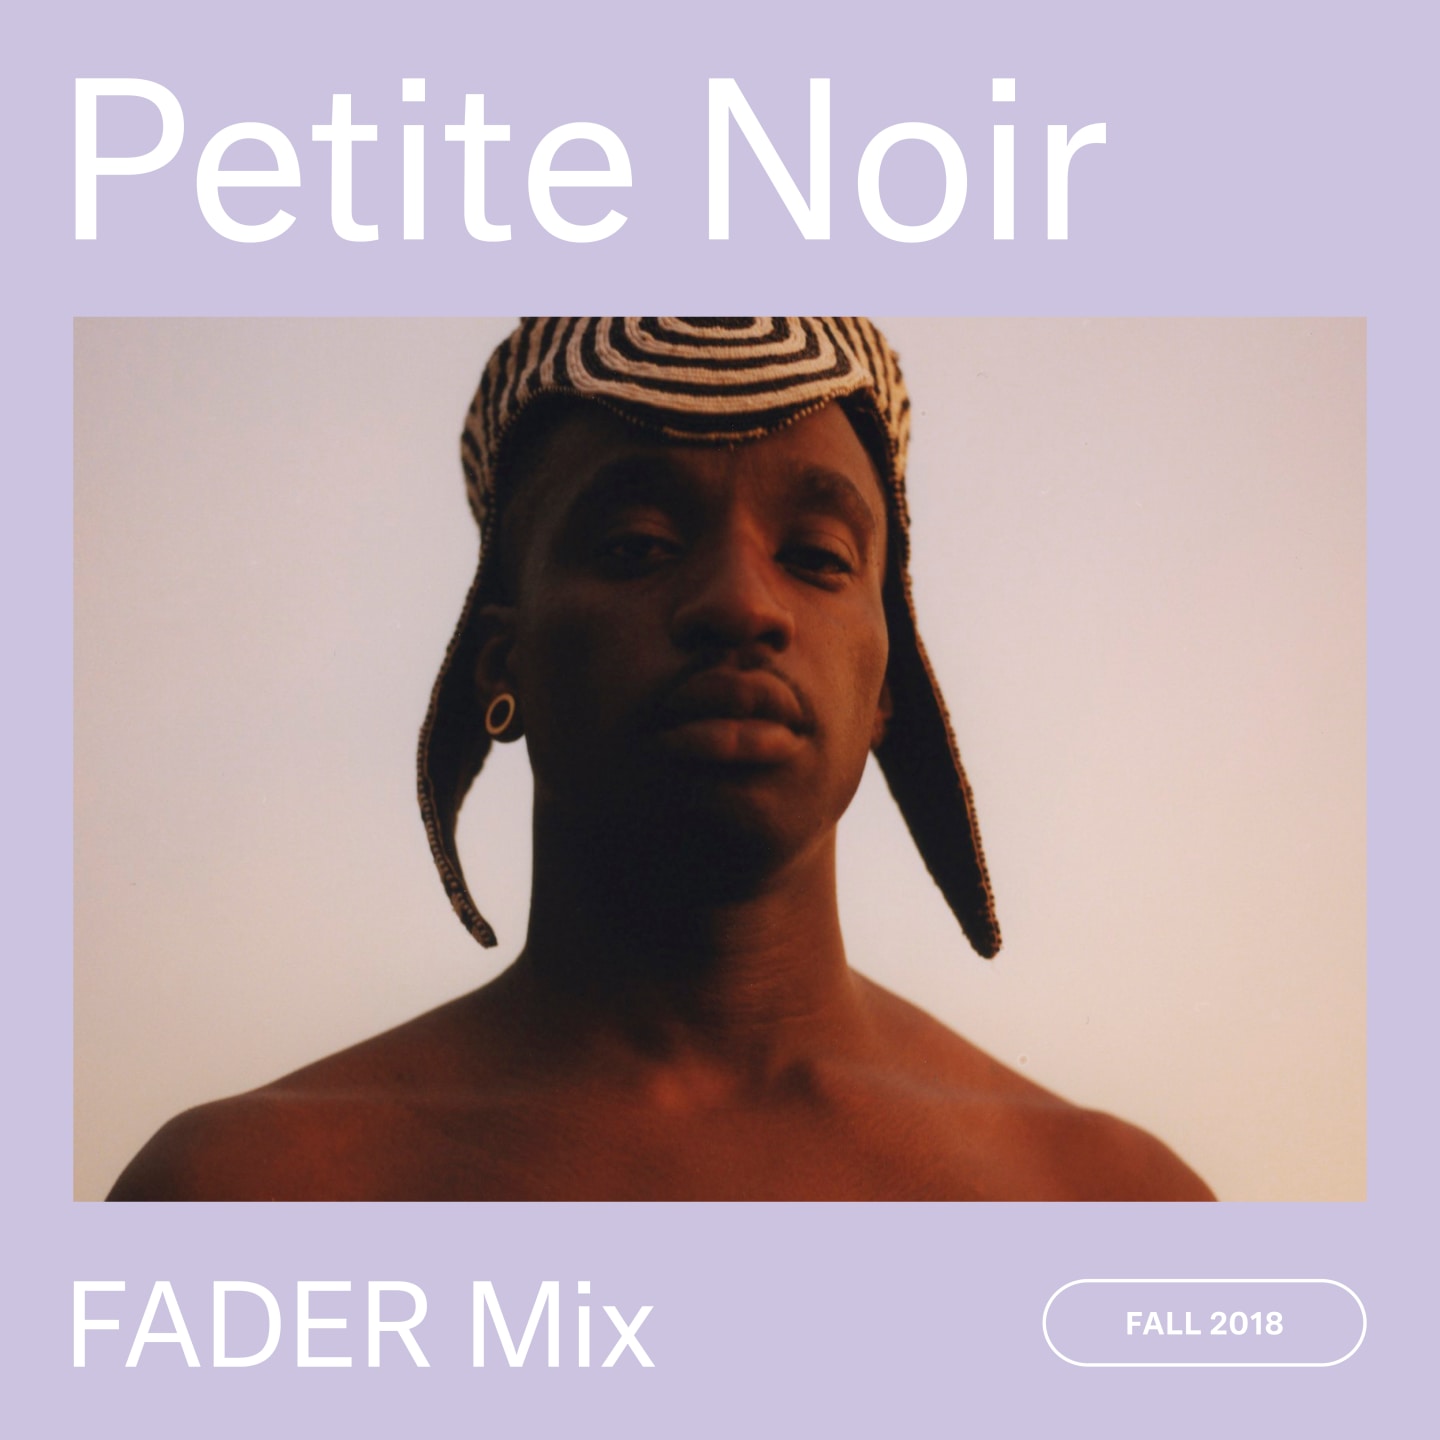 Listen to a new FADER Mix by Petite Noir